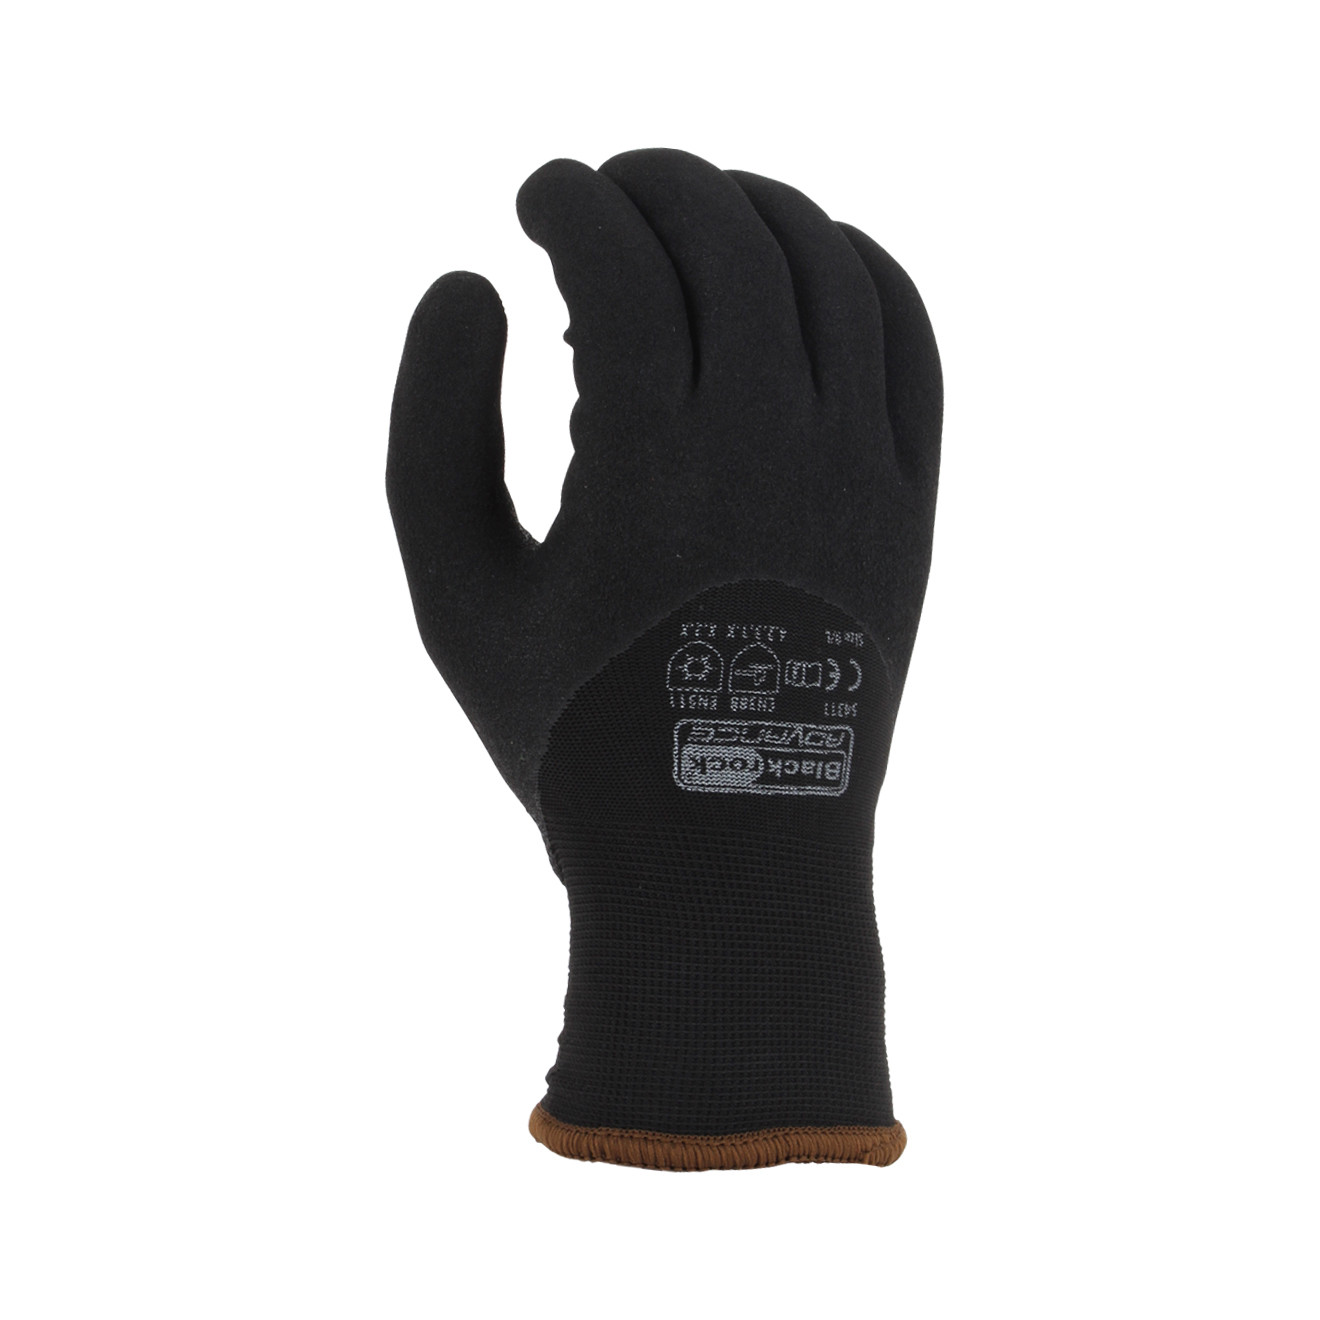 Thermotite Insulated Glove